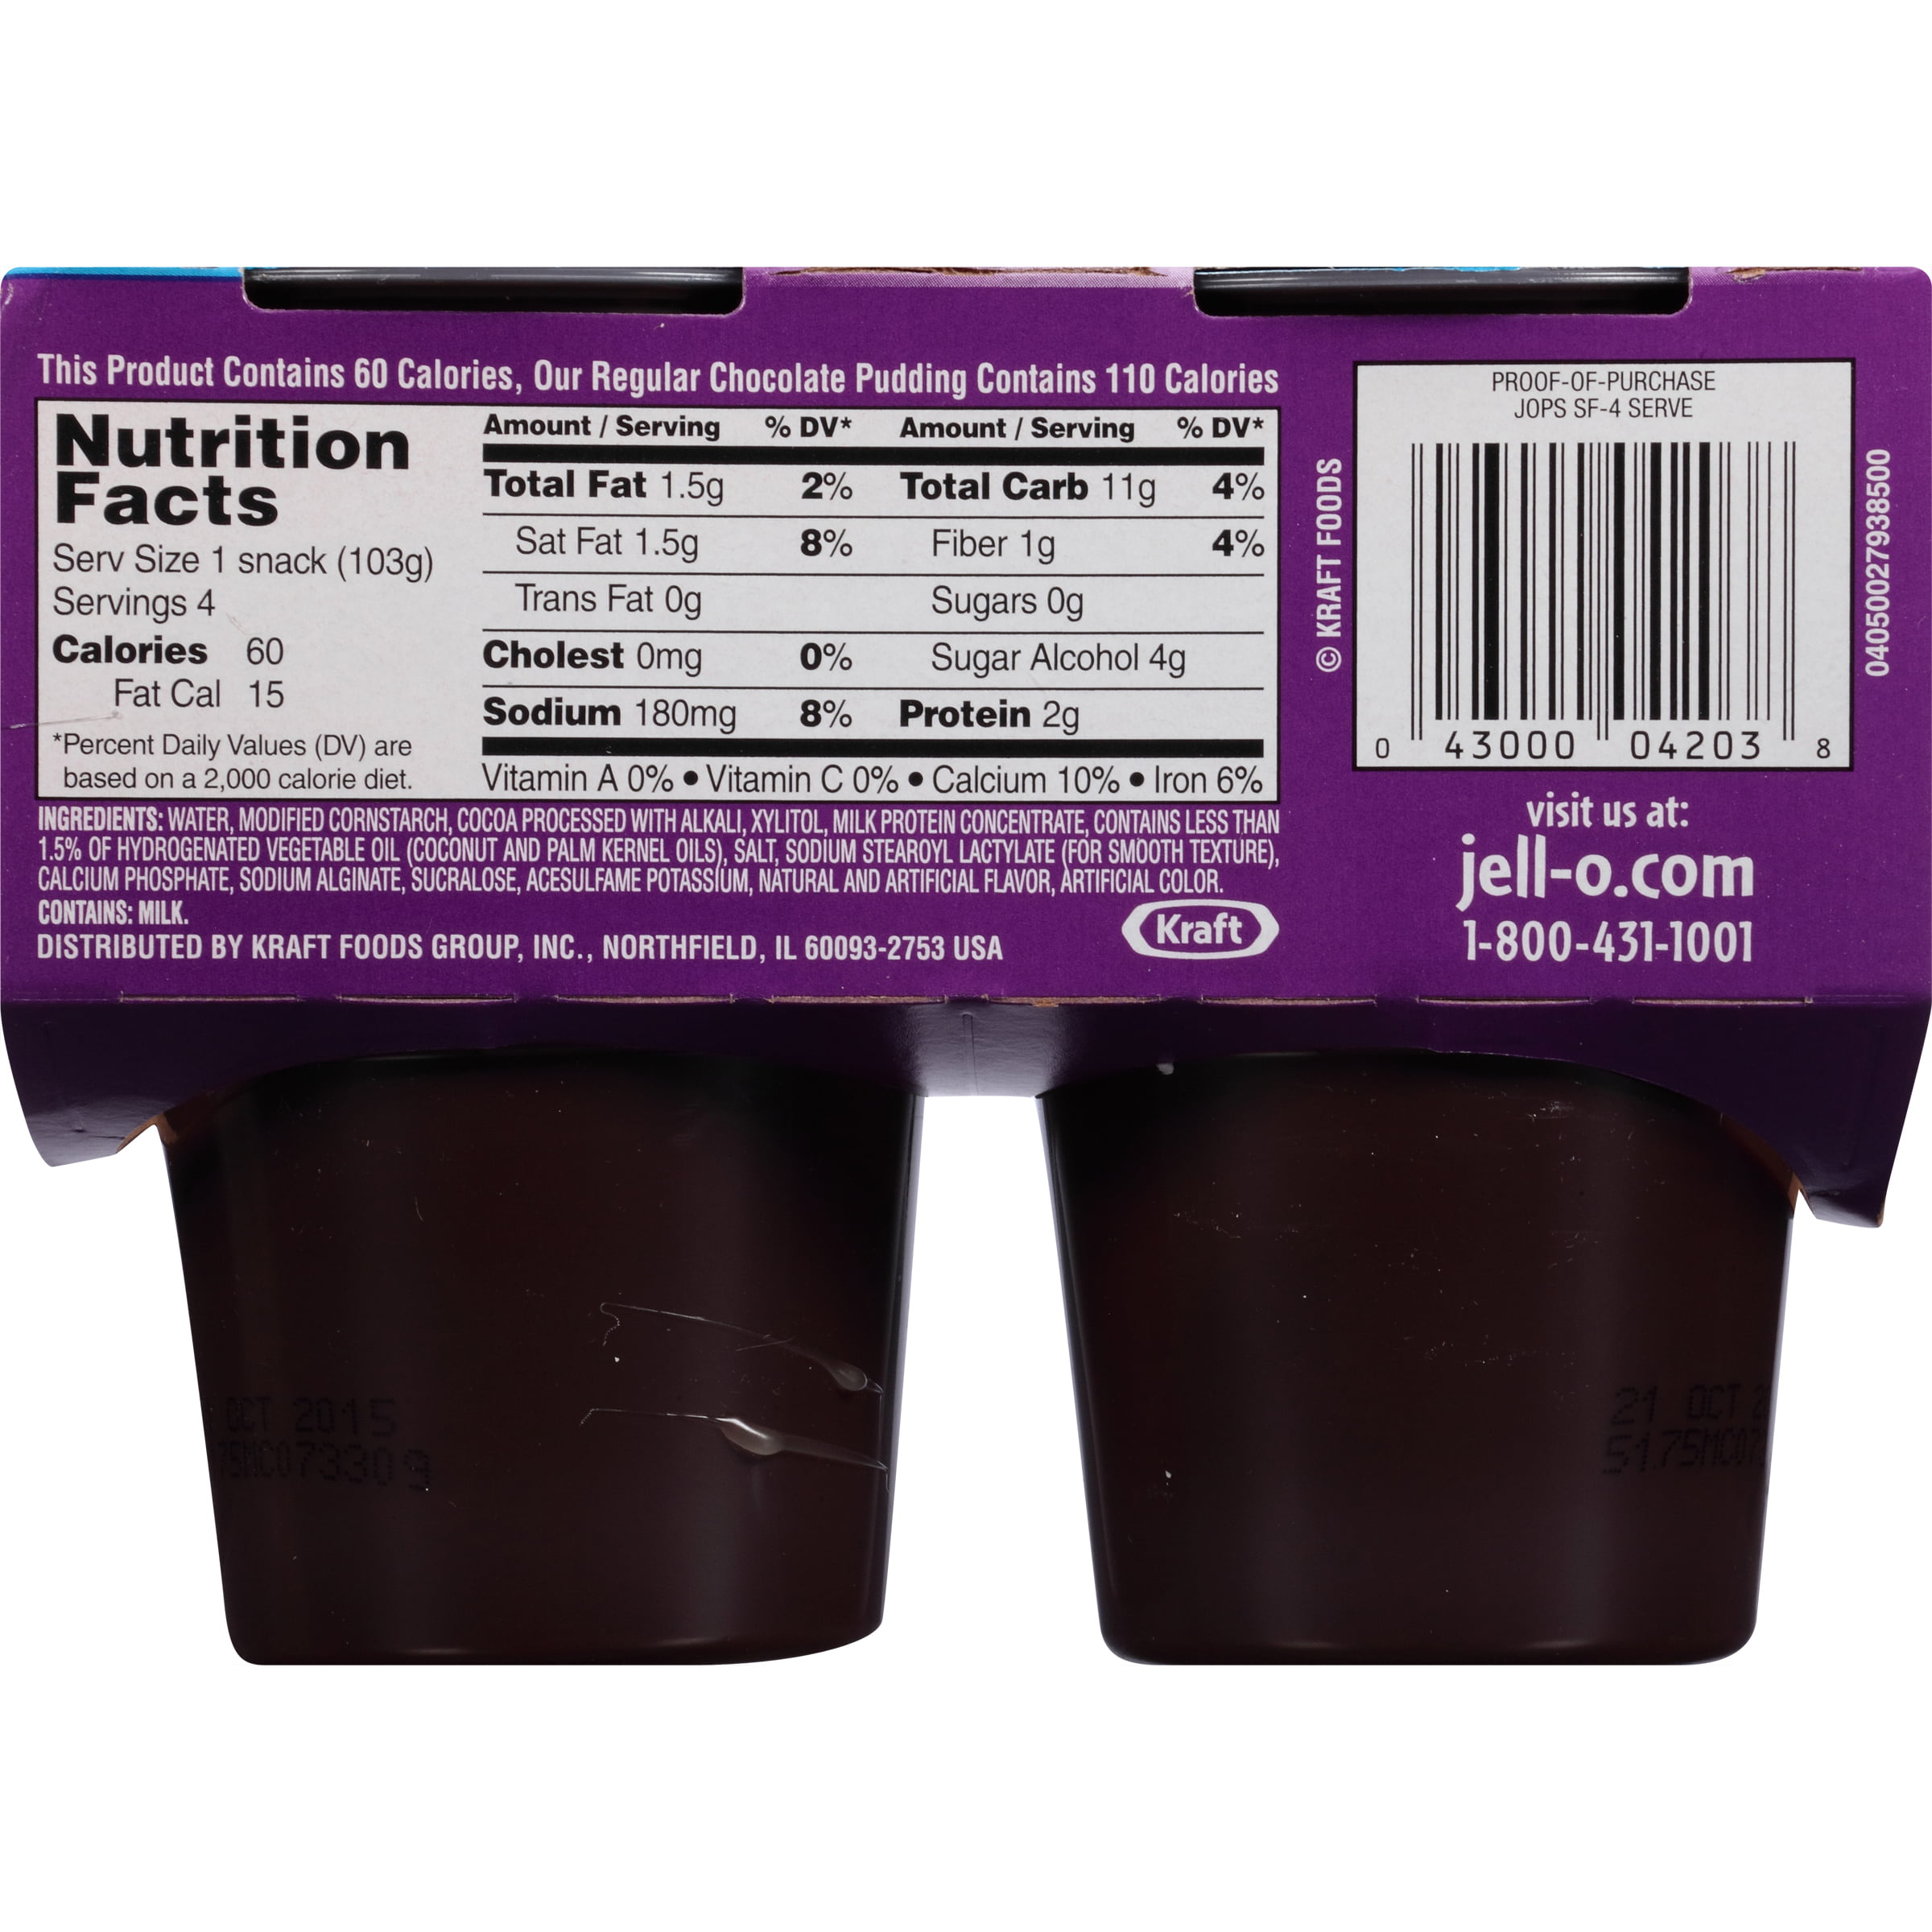 Jello Sugar Free Pudding Cups Nutrition Facts - NutritionWalls